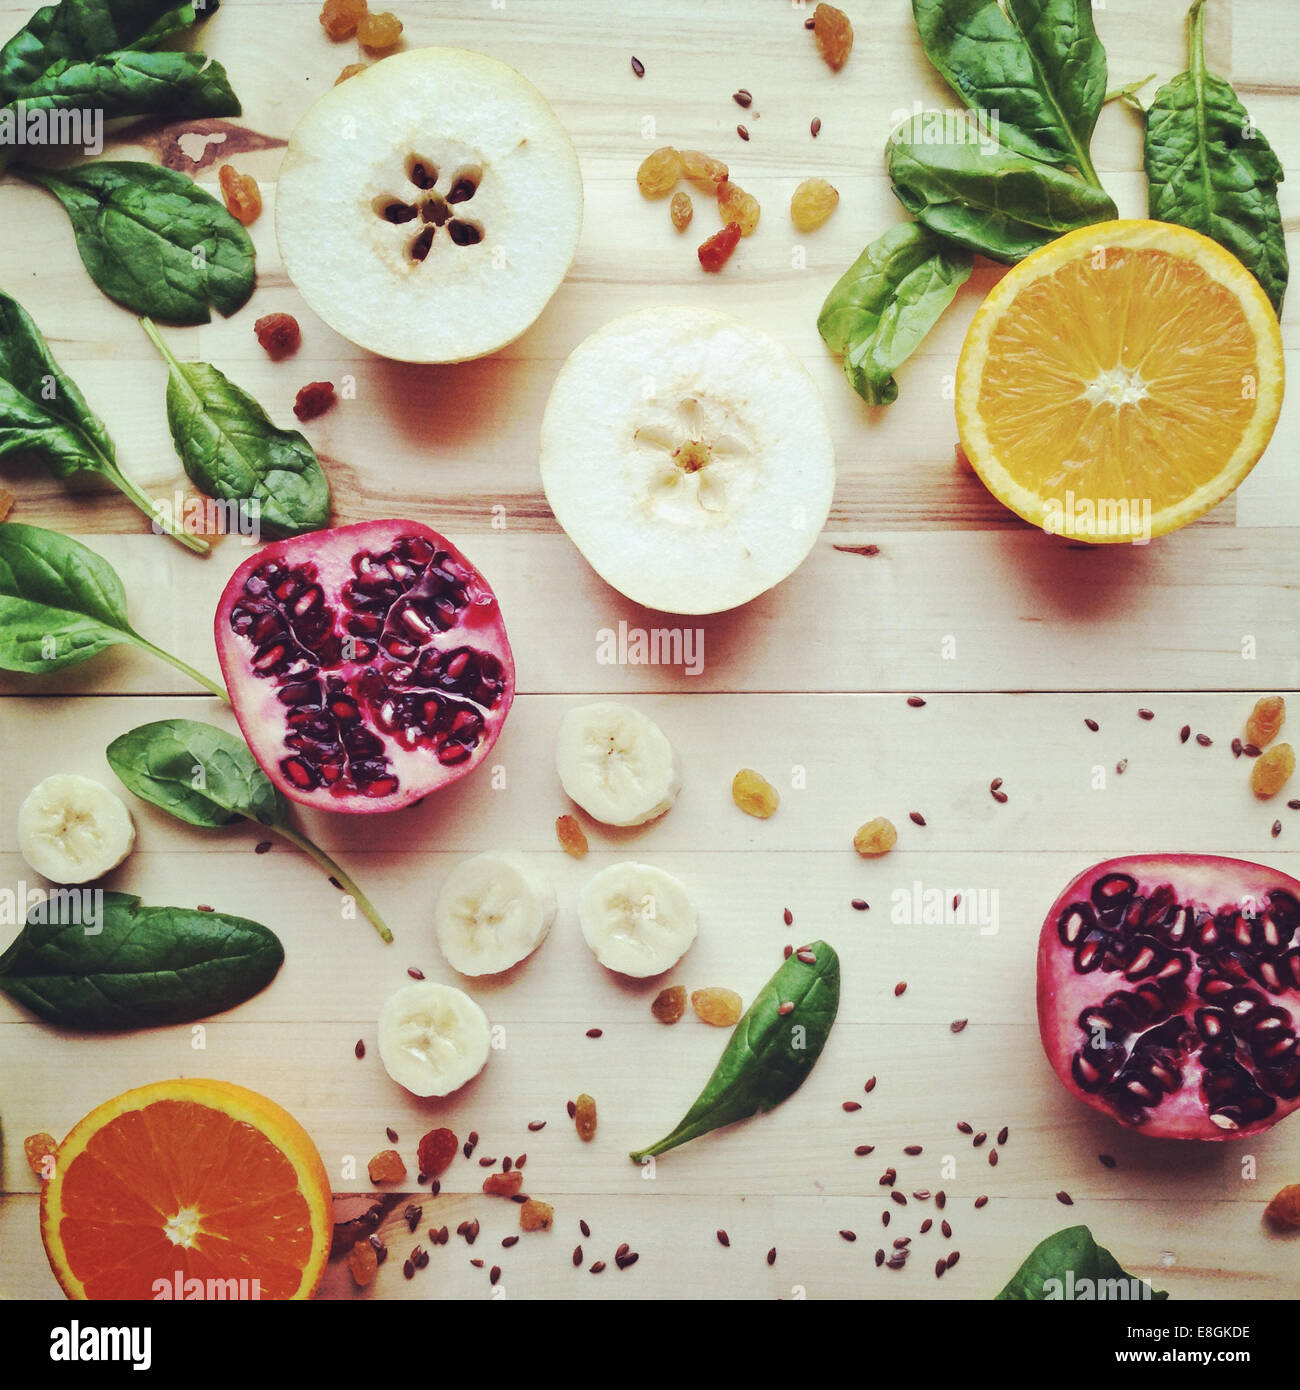 Sliced Fruit, Seeds And Vegetables on a wooden table Stock Photo